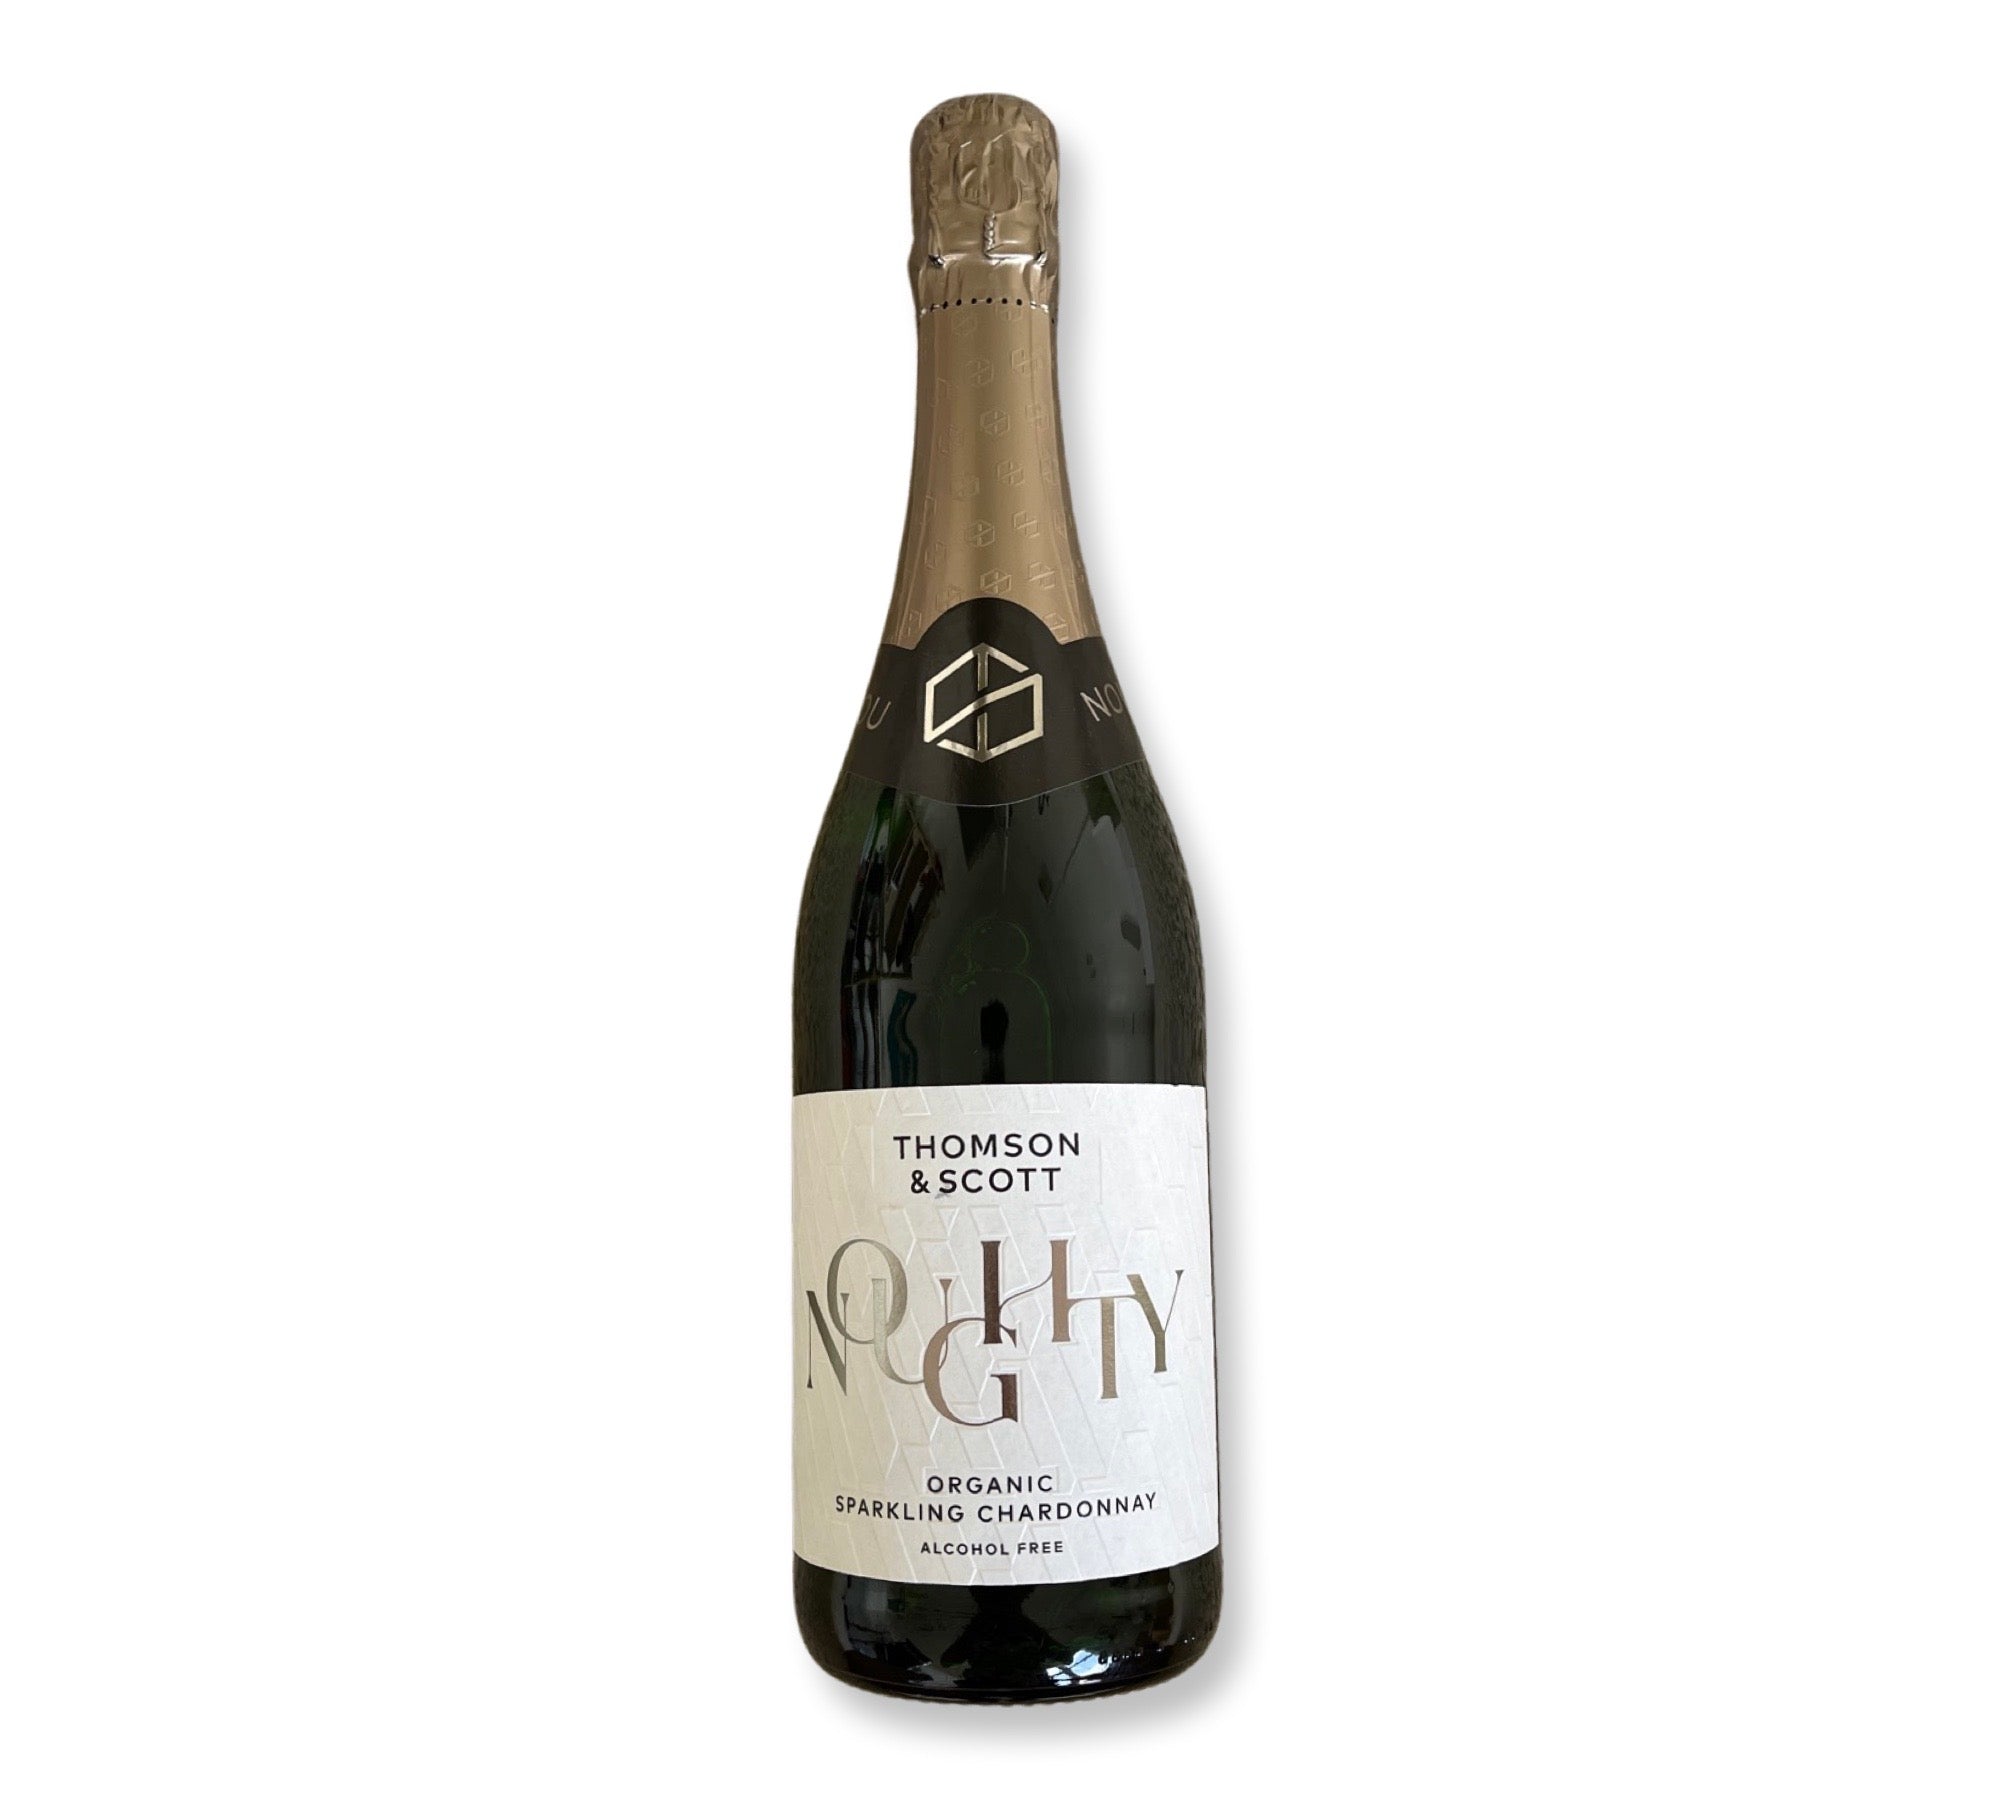 A bottle of Thomson & Scott "Noughty" organic, alcohol-free Sparkling Chardonnay, displayed against a plain background in a Celebrate giftbox by giftbox co.